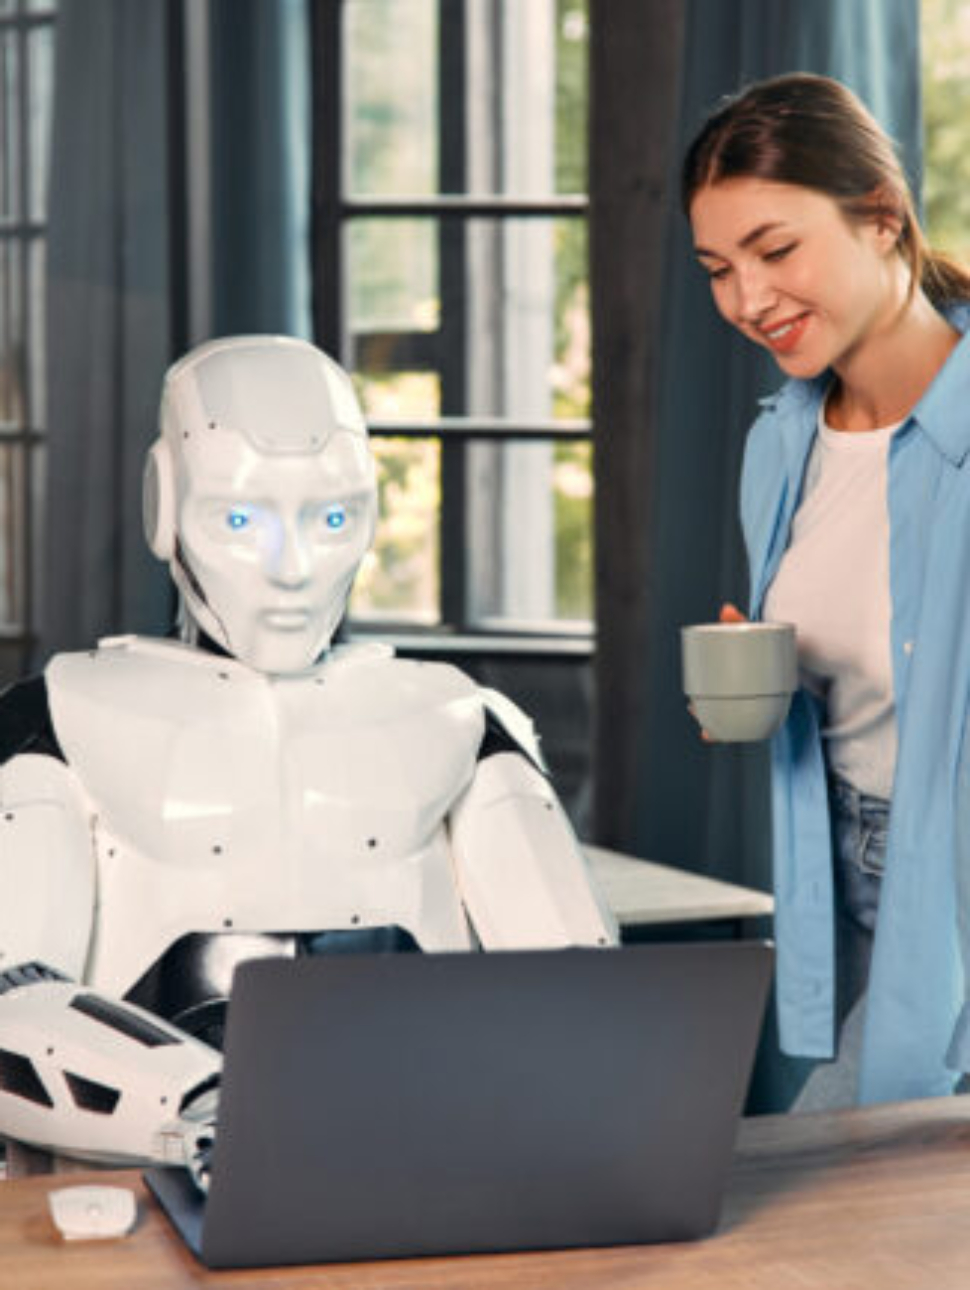 Young woman with a cup of coffee and a humanoid robot working while sitting at a laptop in a modern office. Collaboration between humans and artificial intelligence.